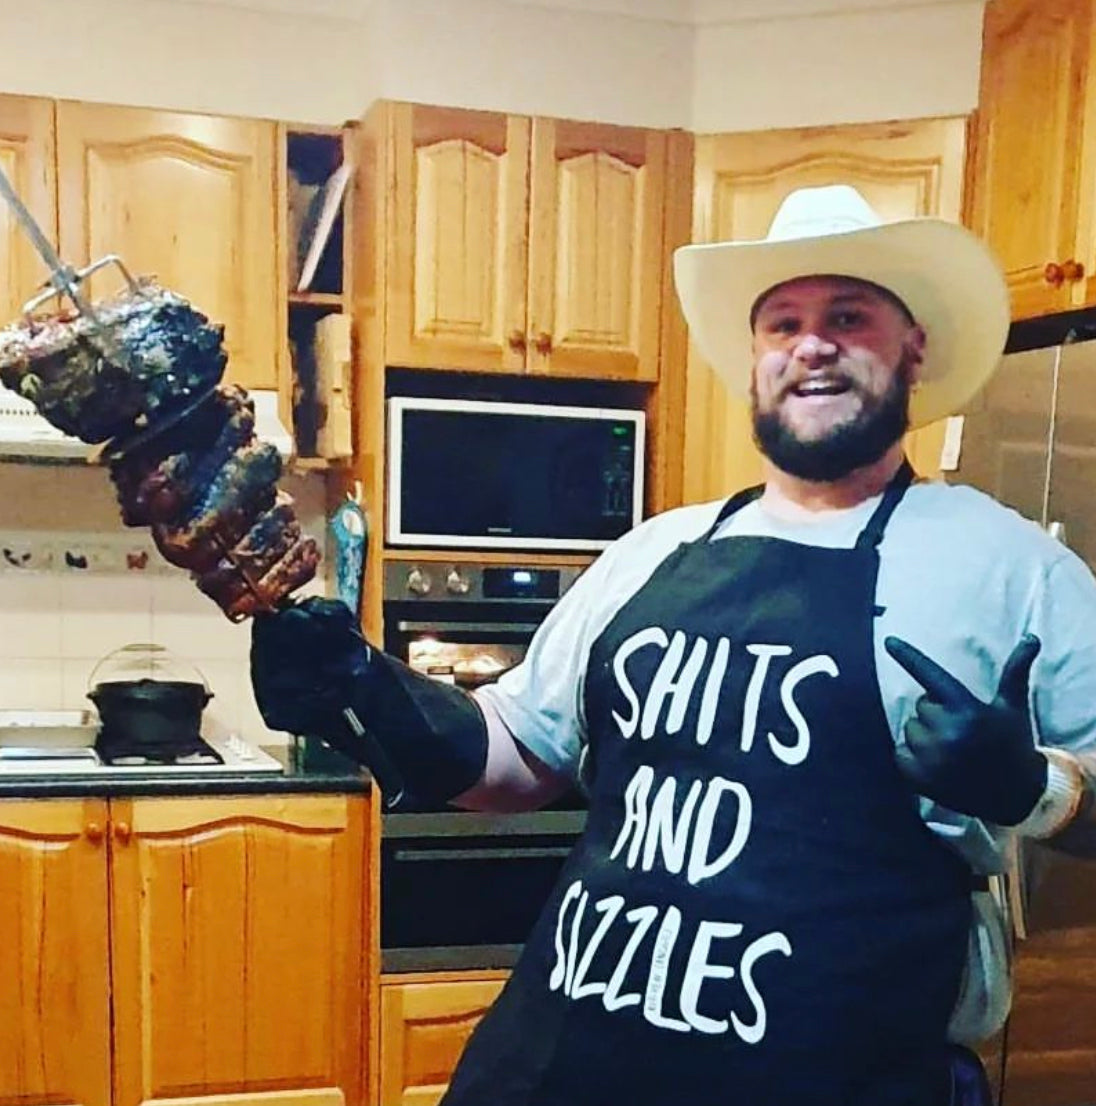 Shits and Sizzles apron